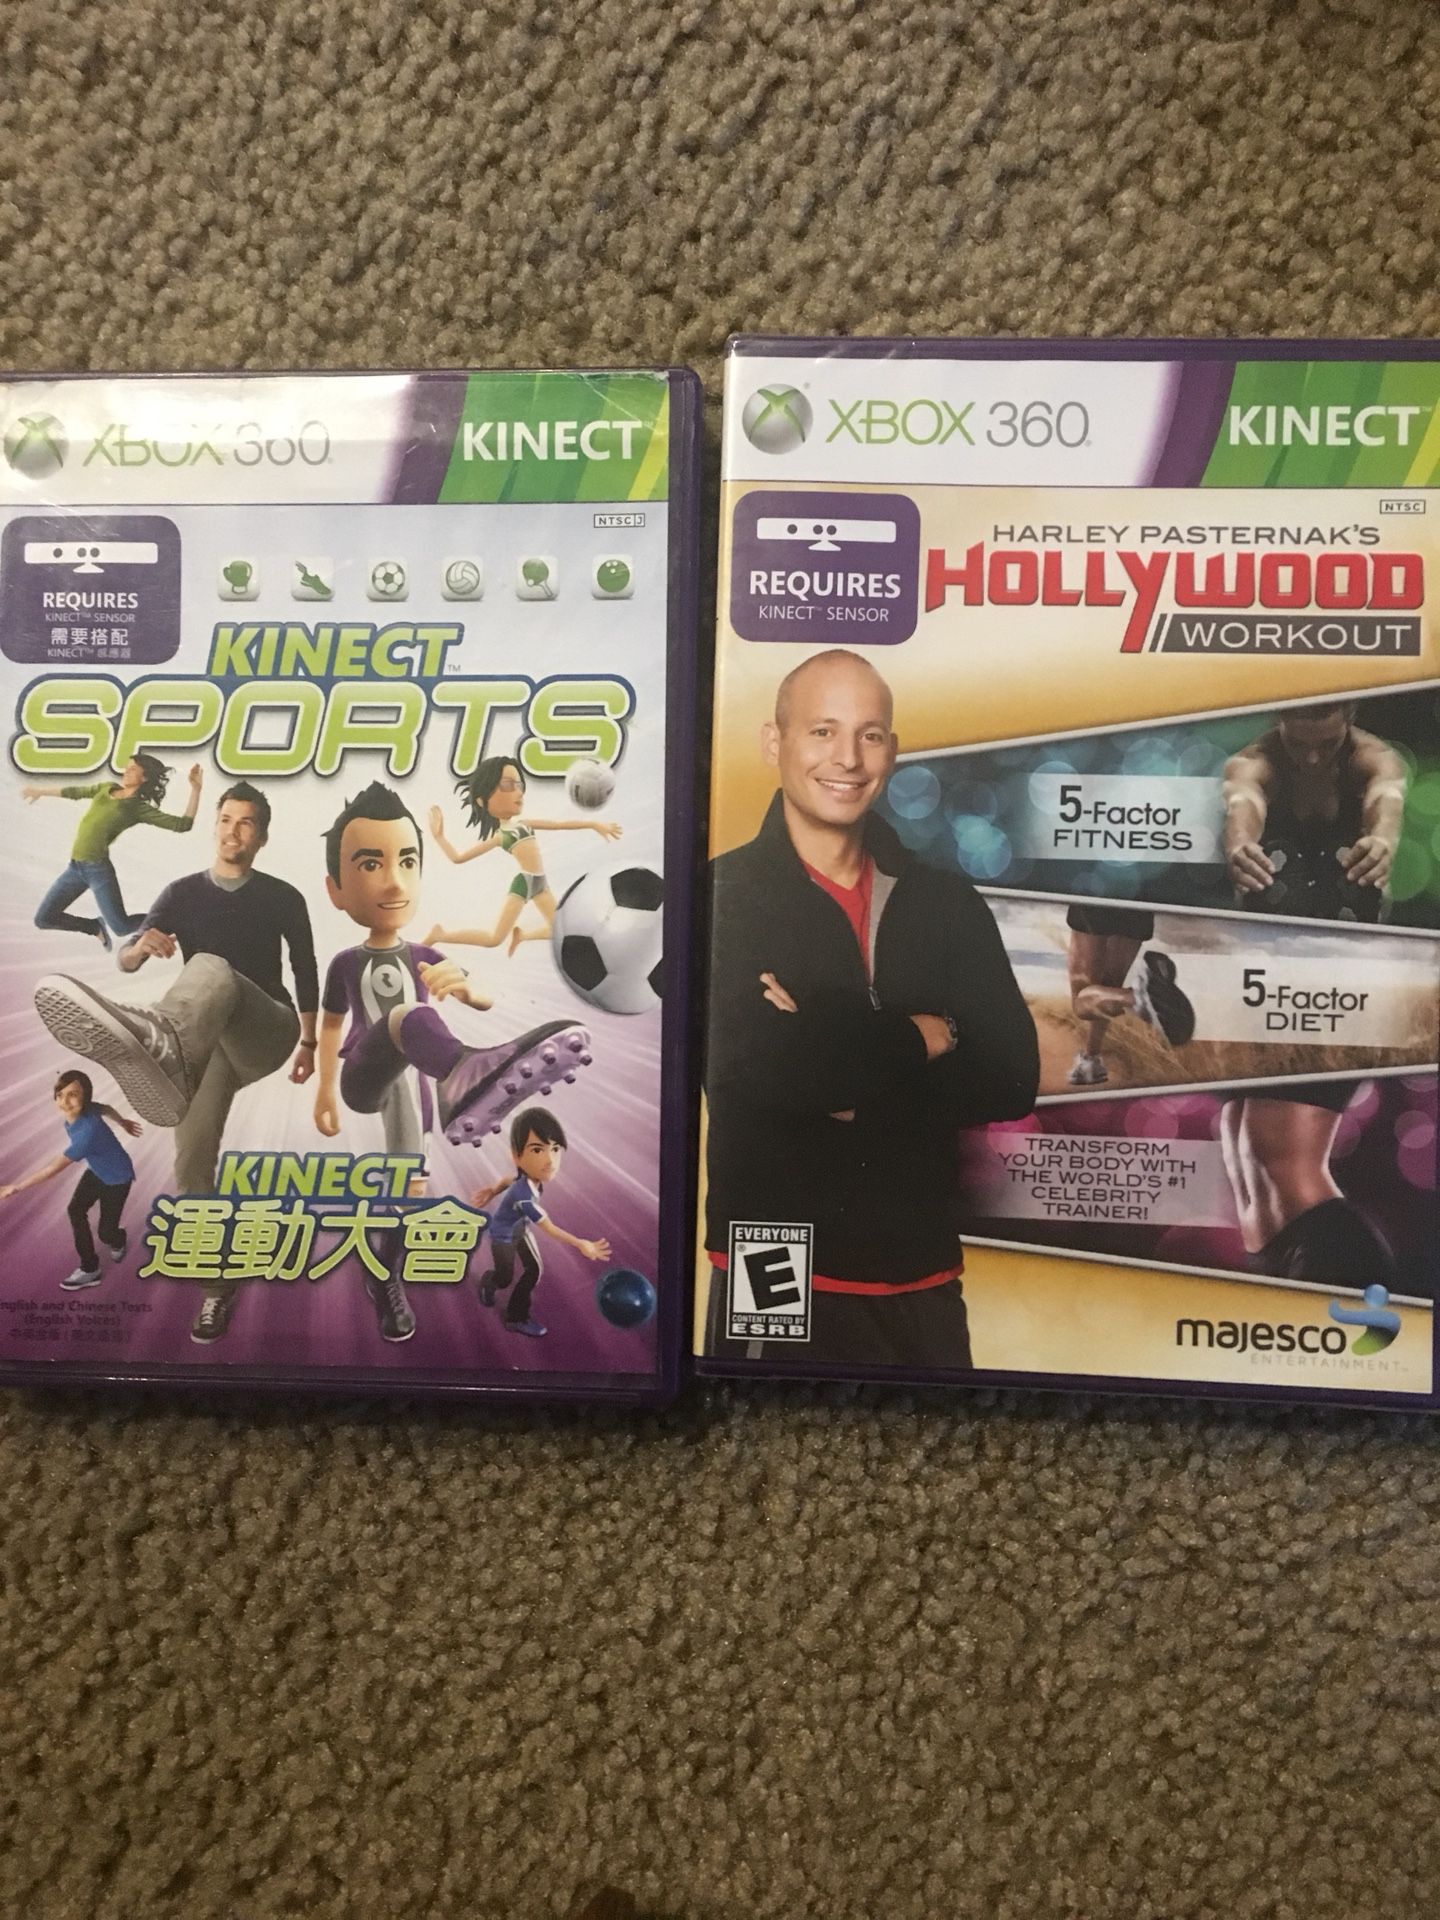 Kinect sports and holywood workout xbox 360 games